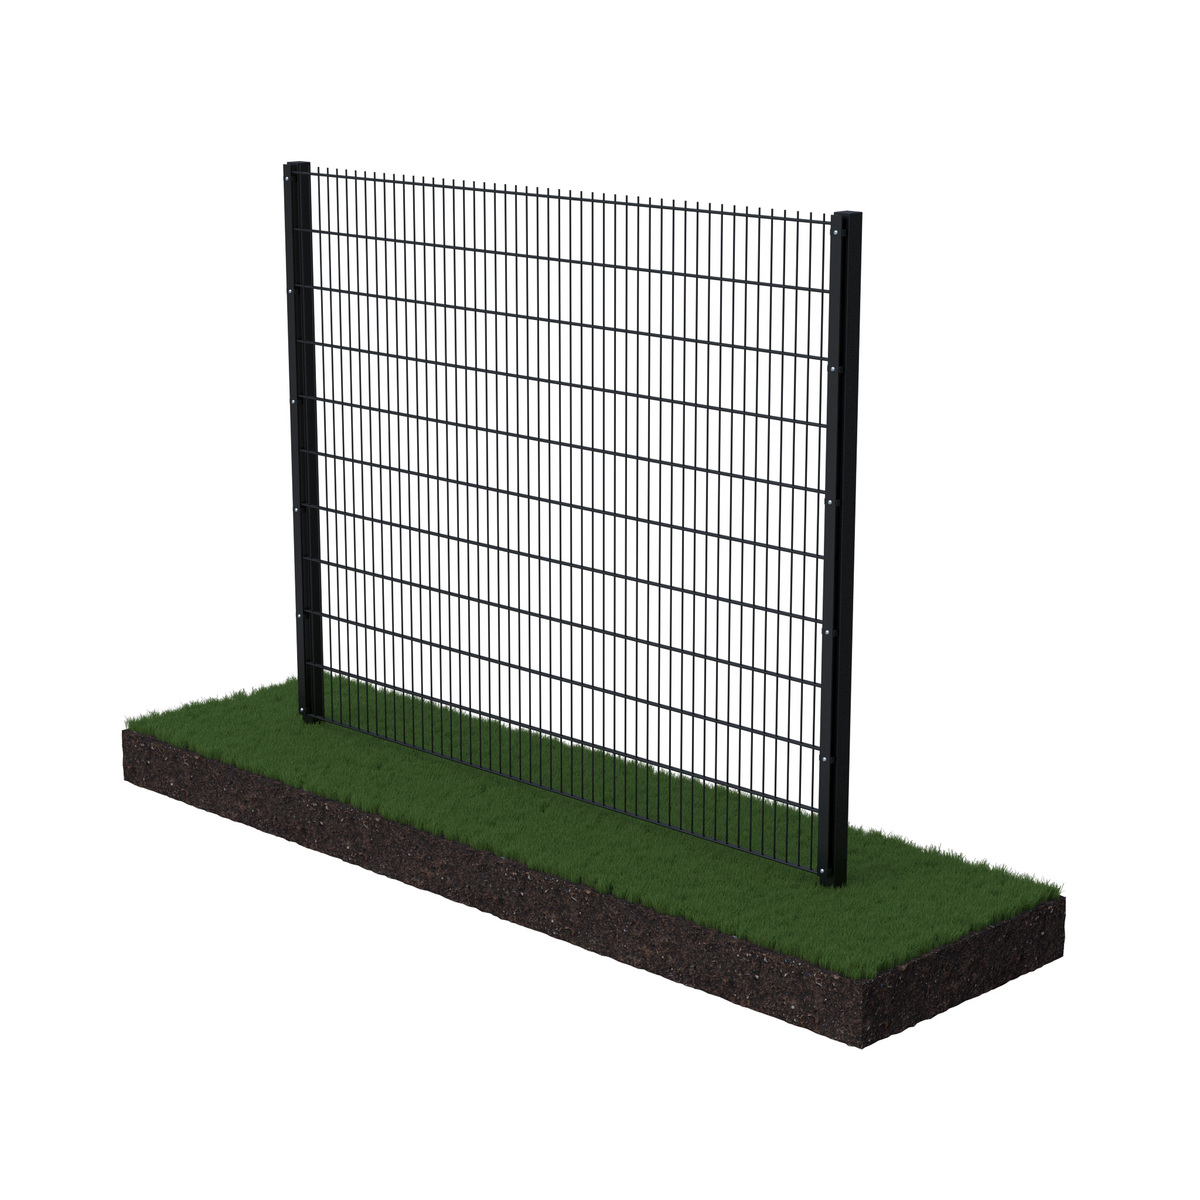 High quality low cost PVC Powder coated durable 868 double wire mesh fence